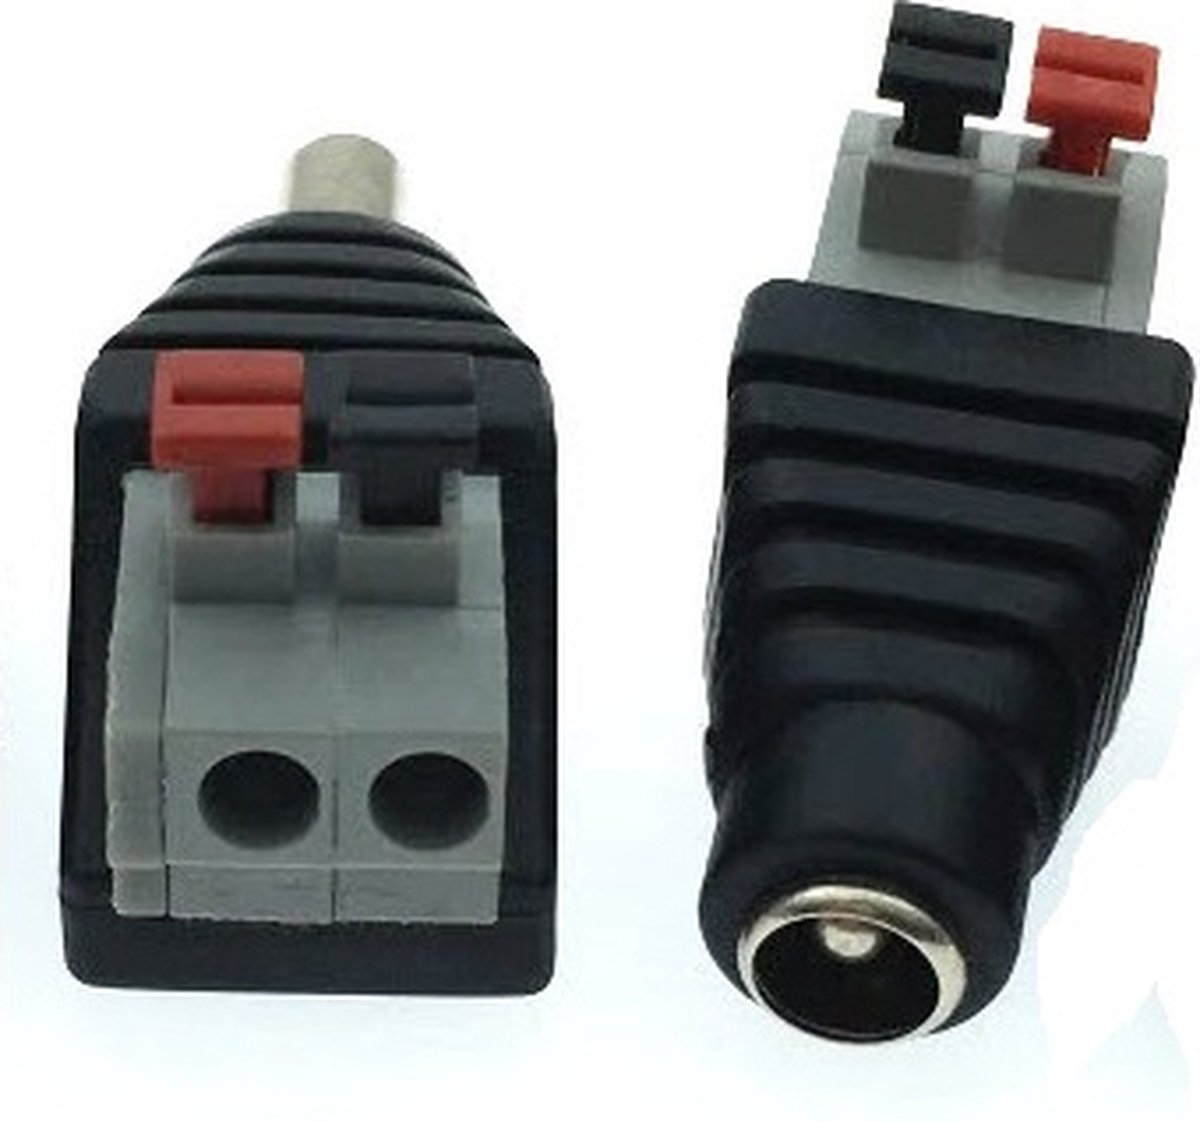 DC Power Jack Connector